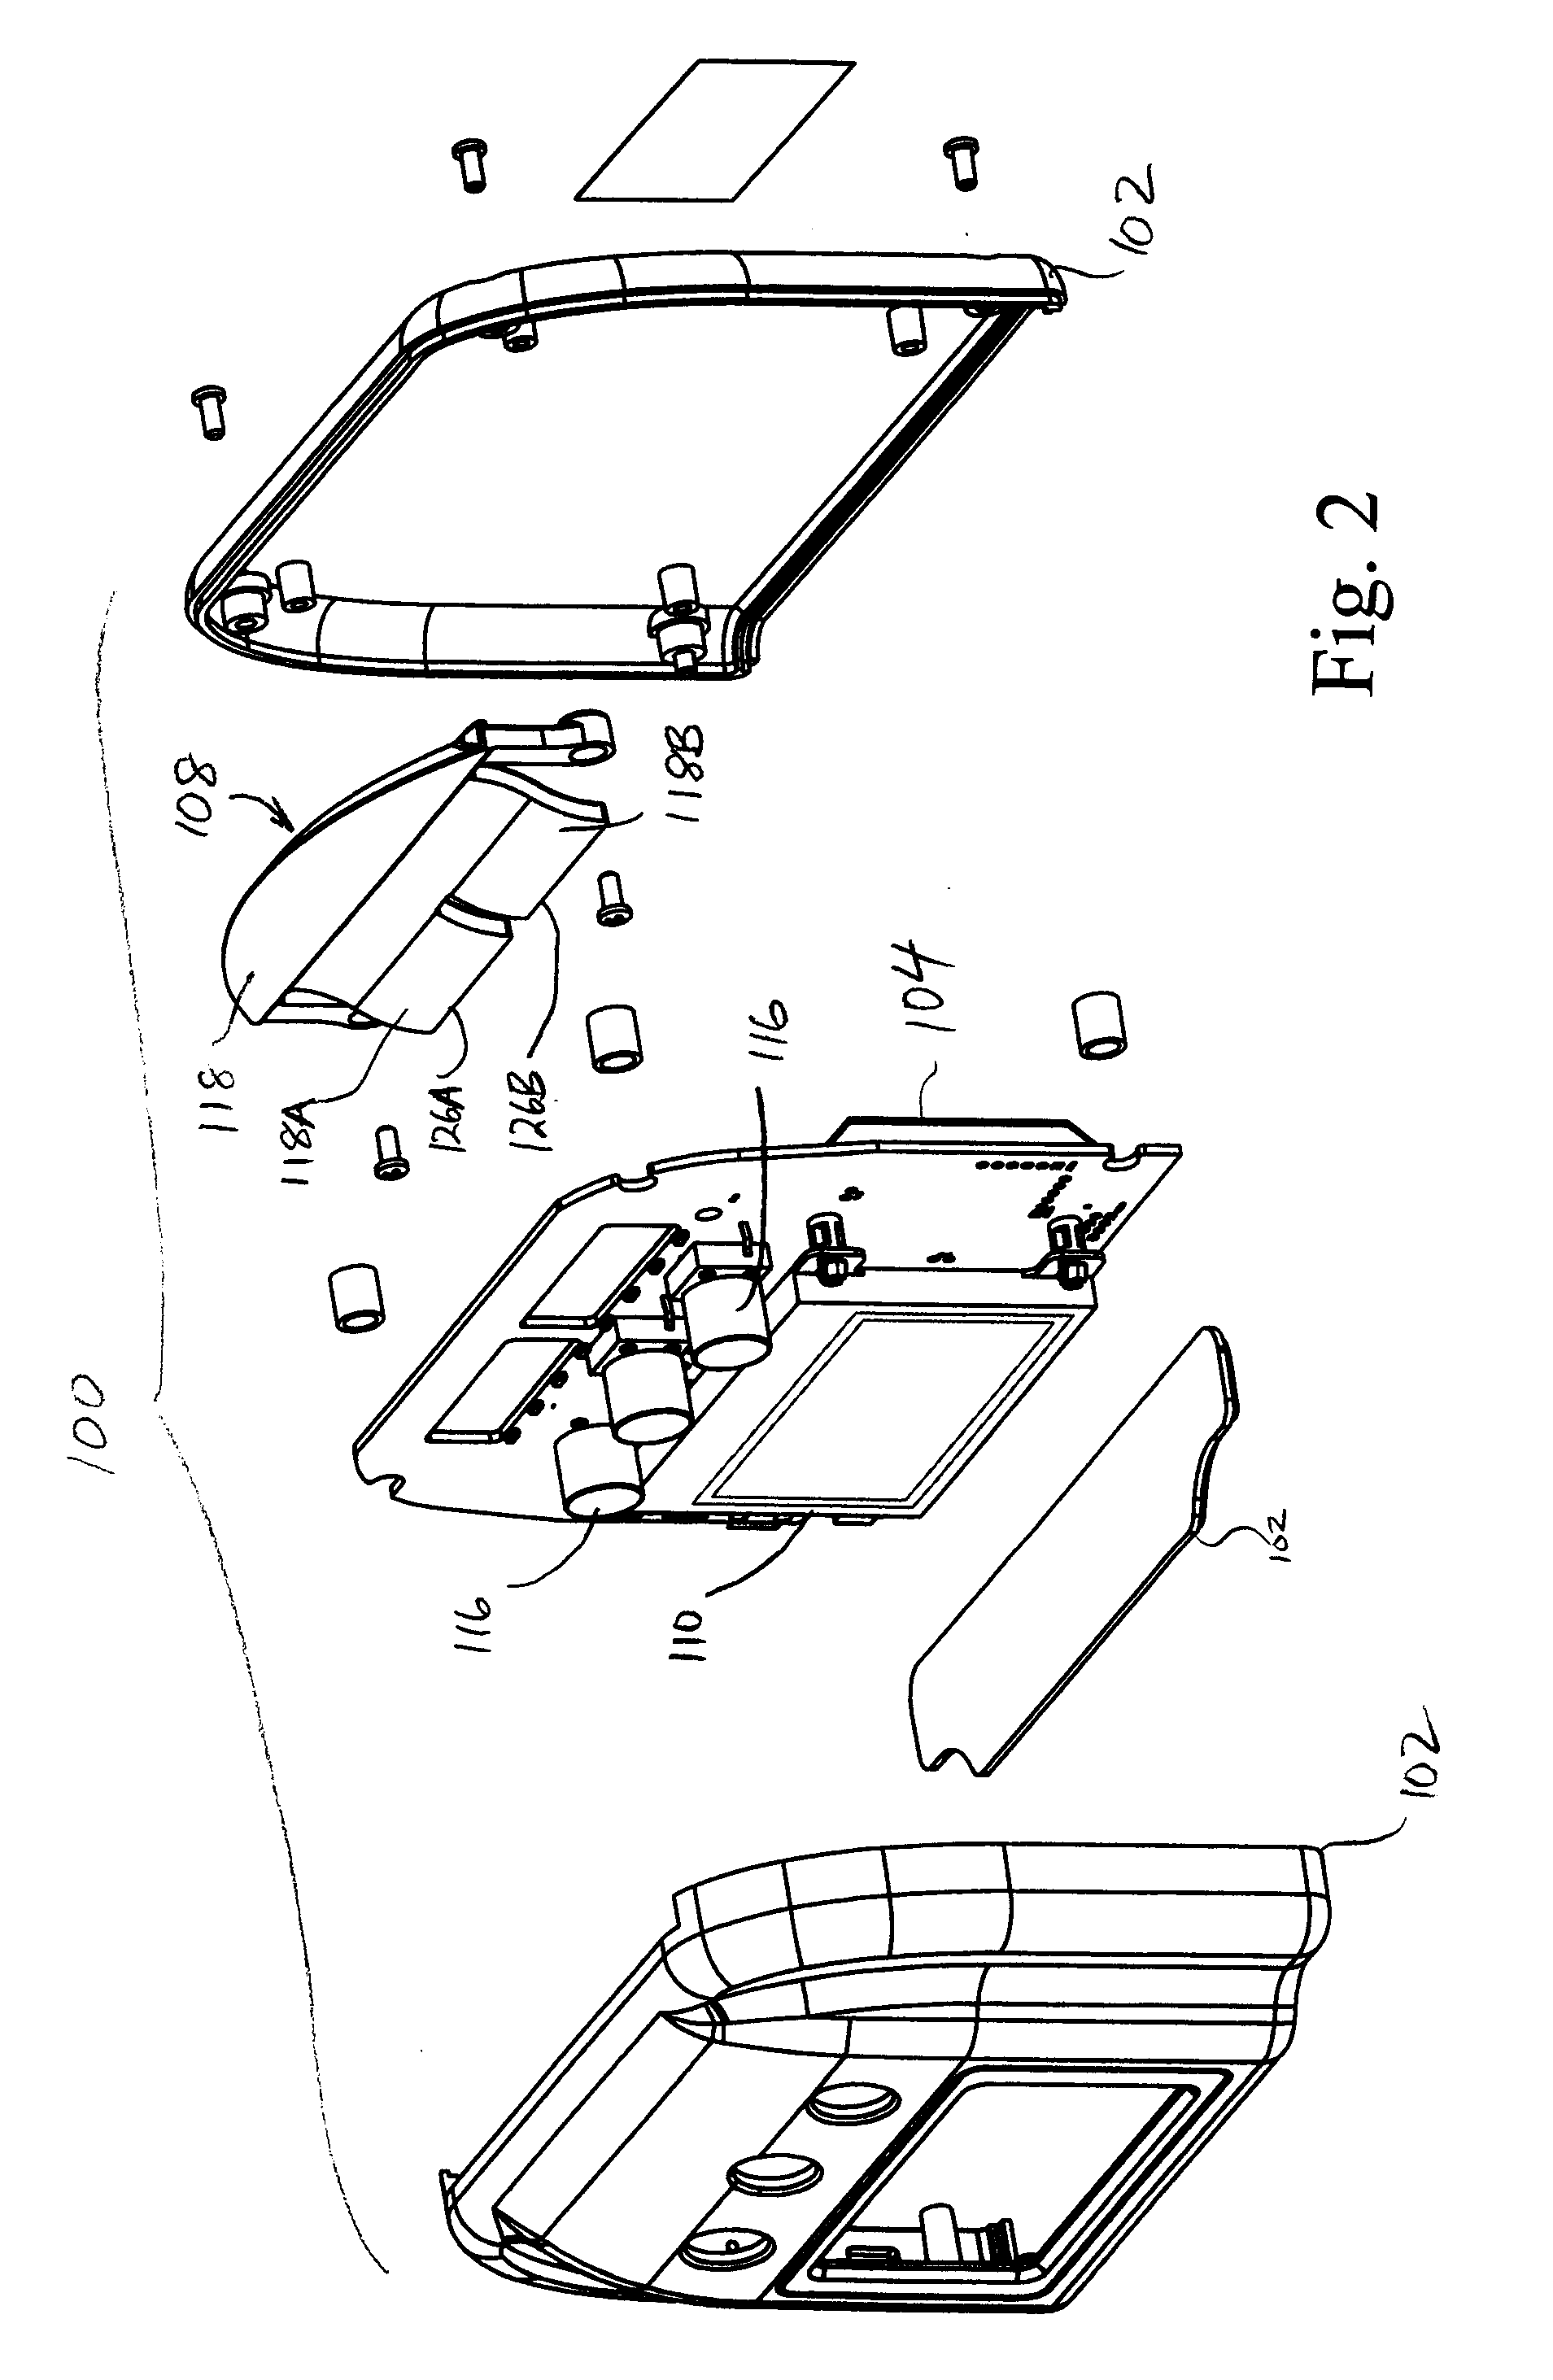 Utility monitoring device, system and method